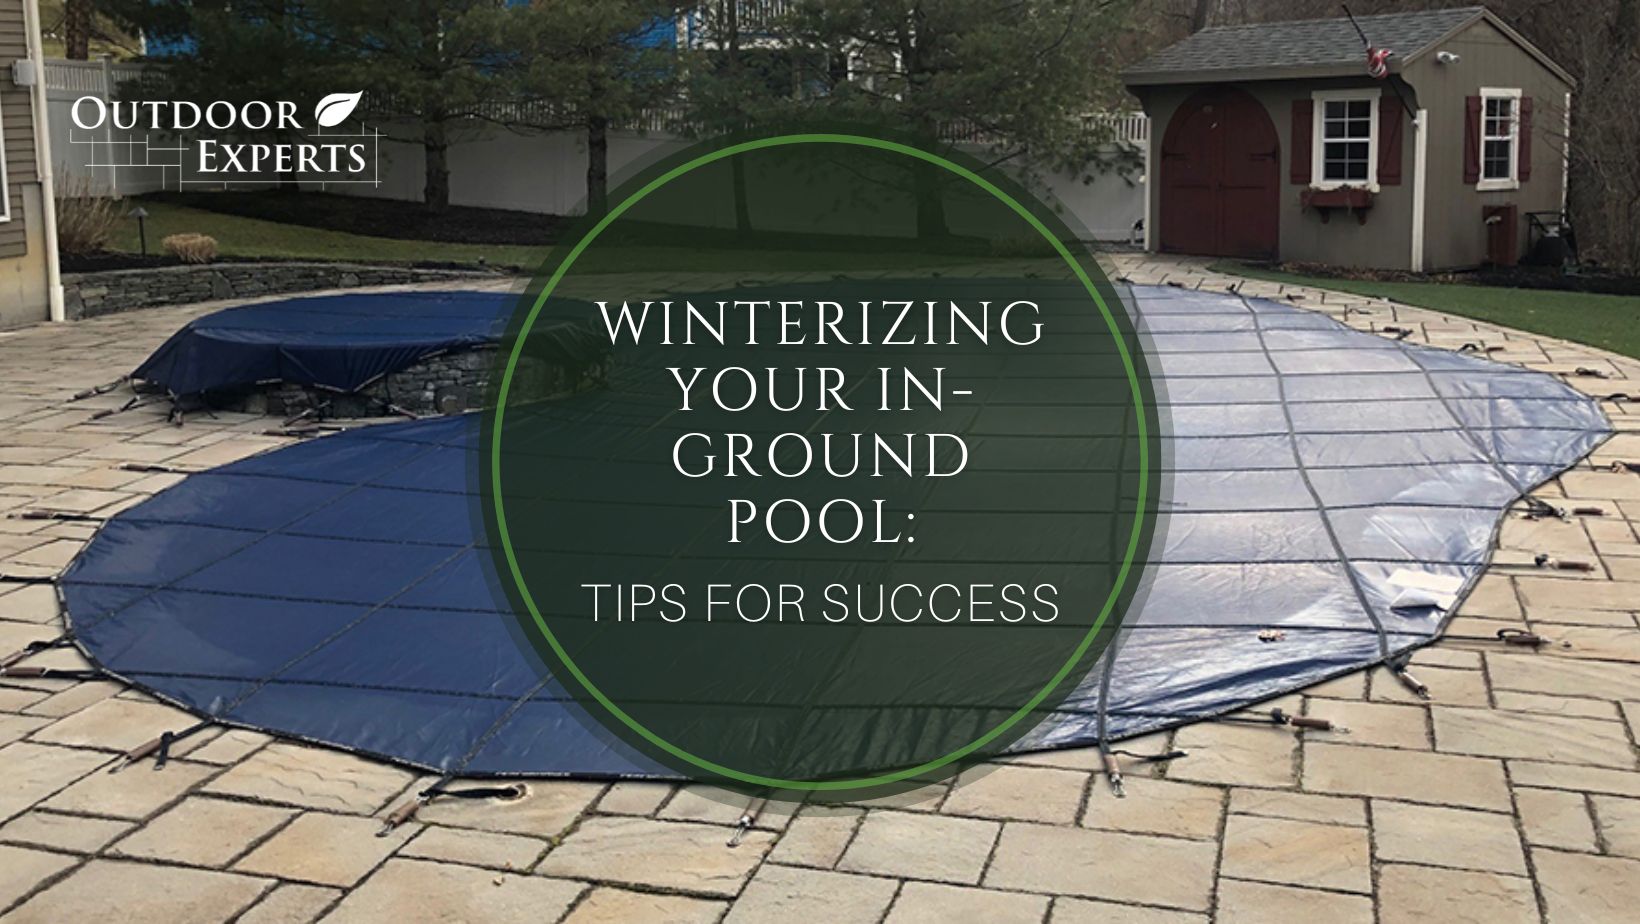 Winterizing Your In-Ground Pool: Tips for Success